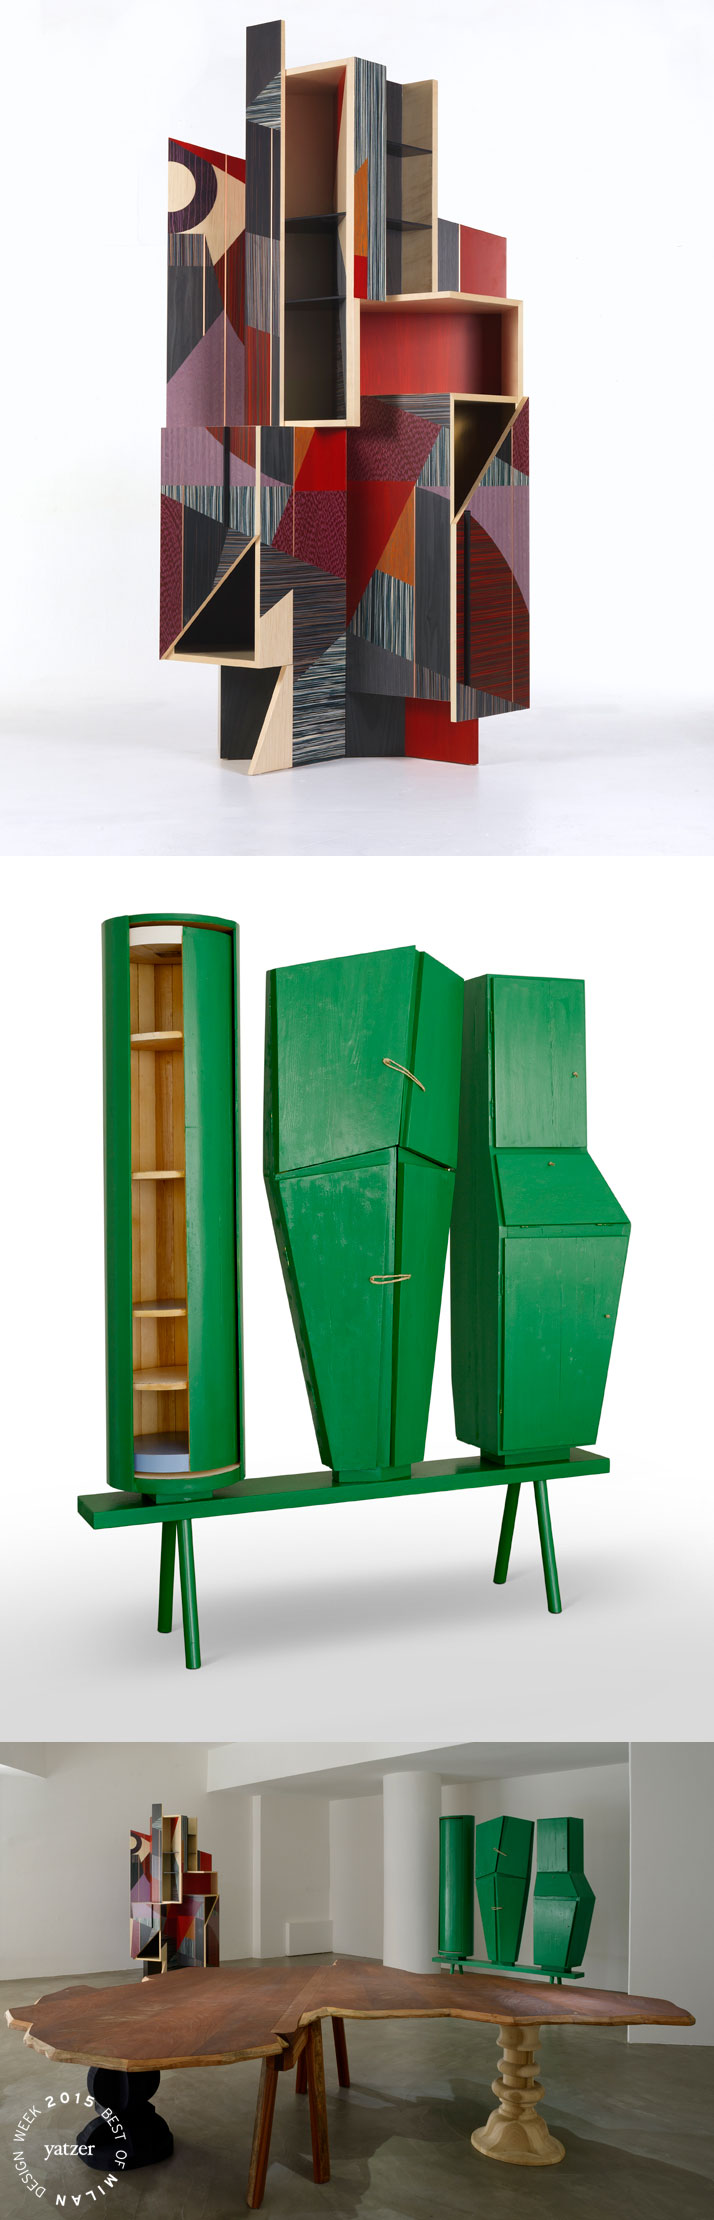 9 + uno (nine plus one) exhibition at DILMOS Gallery. From top to bottom:&gt; Magico3 cabinet by Alessandro Mendini, a 3-piece edition // 215x110x57cm // 2010. &gt; African Farfalla folding table by Francesco Binfare. // width 270cm x length 308cm x height 76.5cm // Materials: Sapele Mahogany wood; hollow-cored panels clad with Feather Mahogany and veneered in Brazilian Rosewood; finished with protective natural oils that accentuate the natural woodgrain. Hinges and closing devices in brass. // 2014.&gt; Mobile Frontale sculpture-cabinet by Pietro Consagra // painted wood // 200x168x38cm // 1956/ 2015.